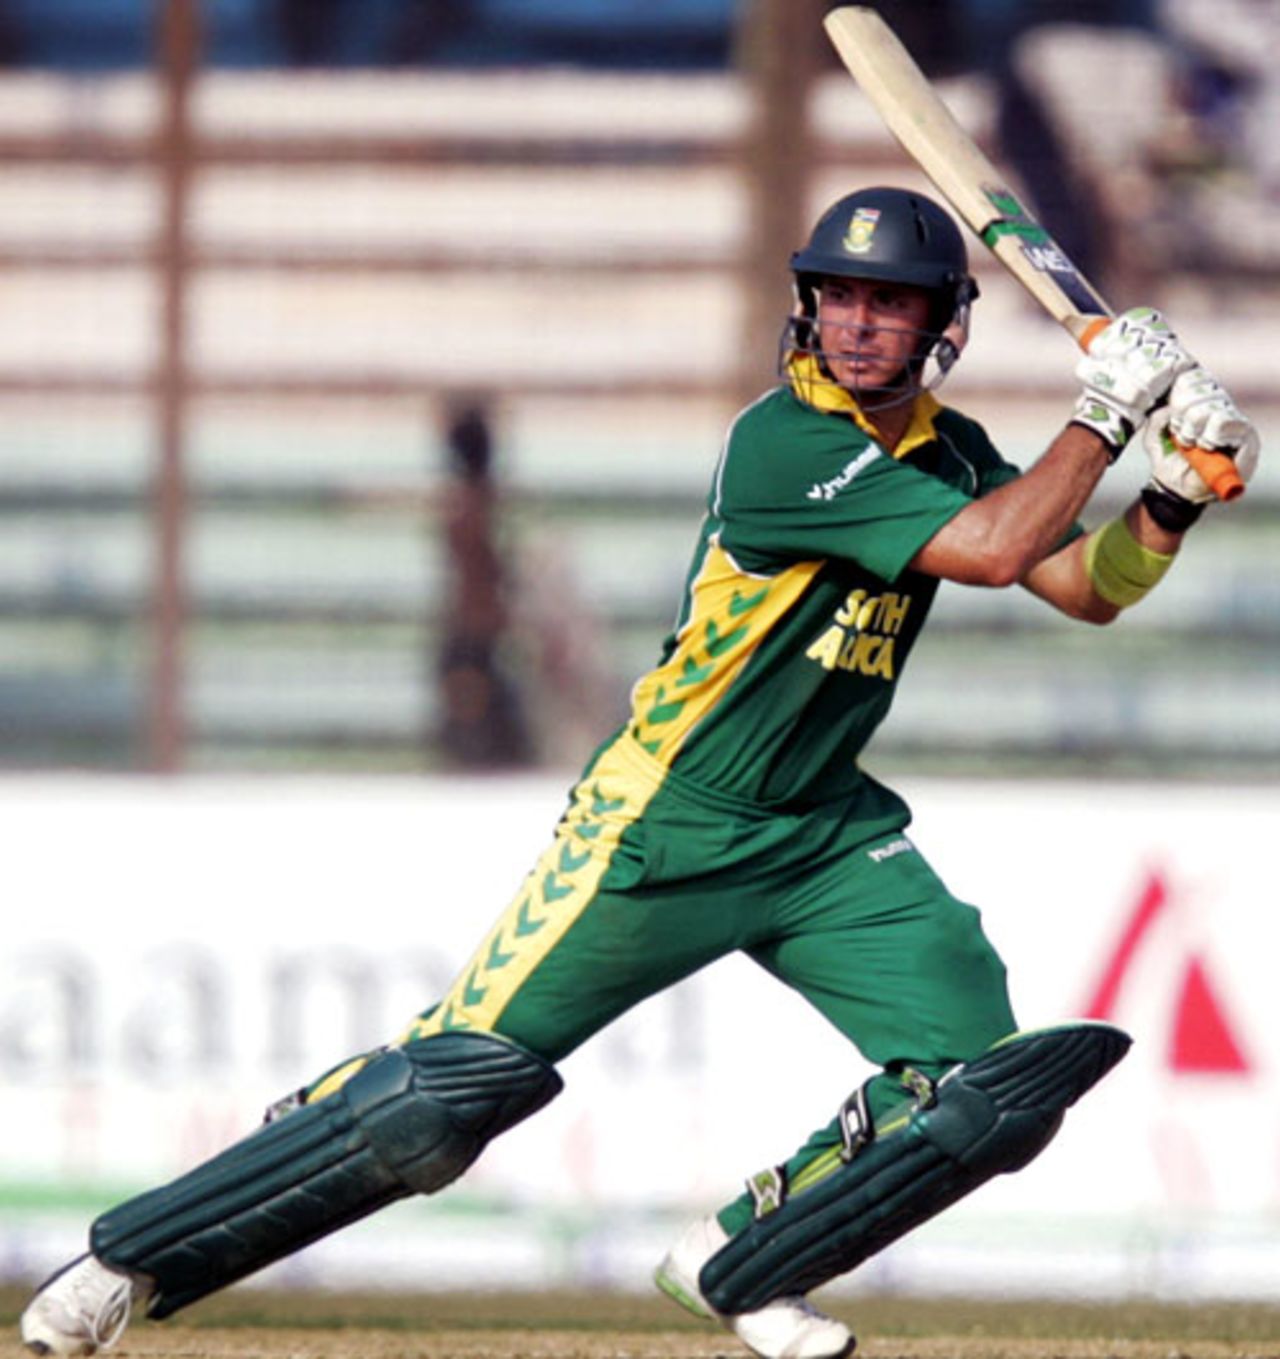 Herschelle Gibbs laces one through the off side, Bangladesh v South Africa, 1st ODI, Chittagong, March 9, 2008